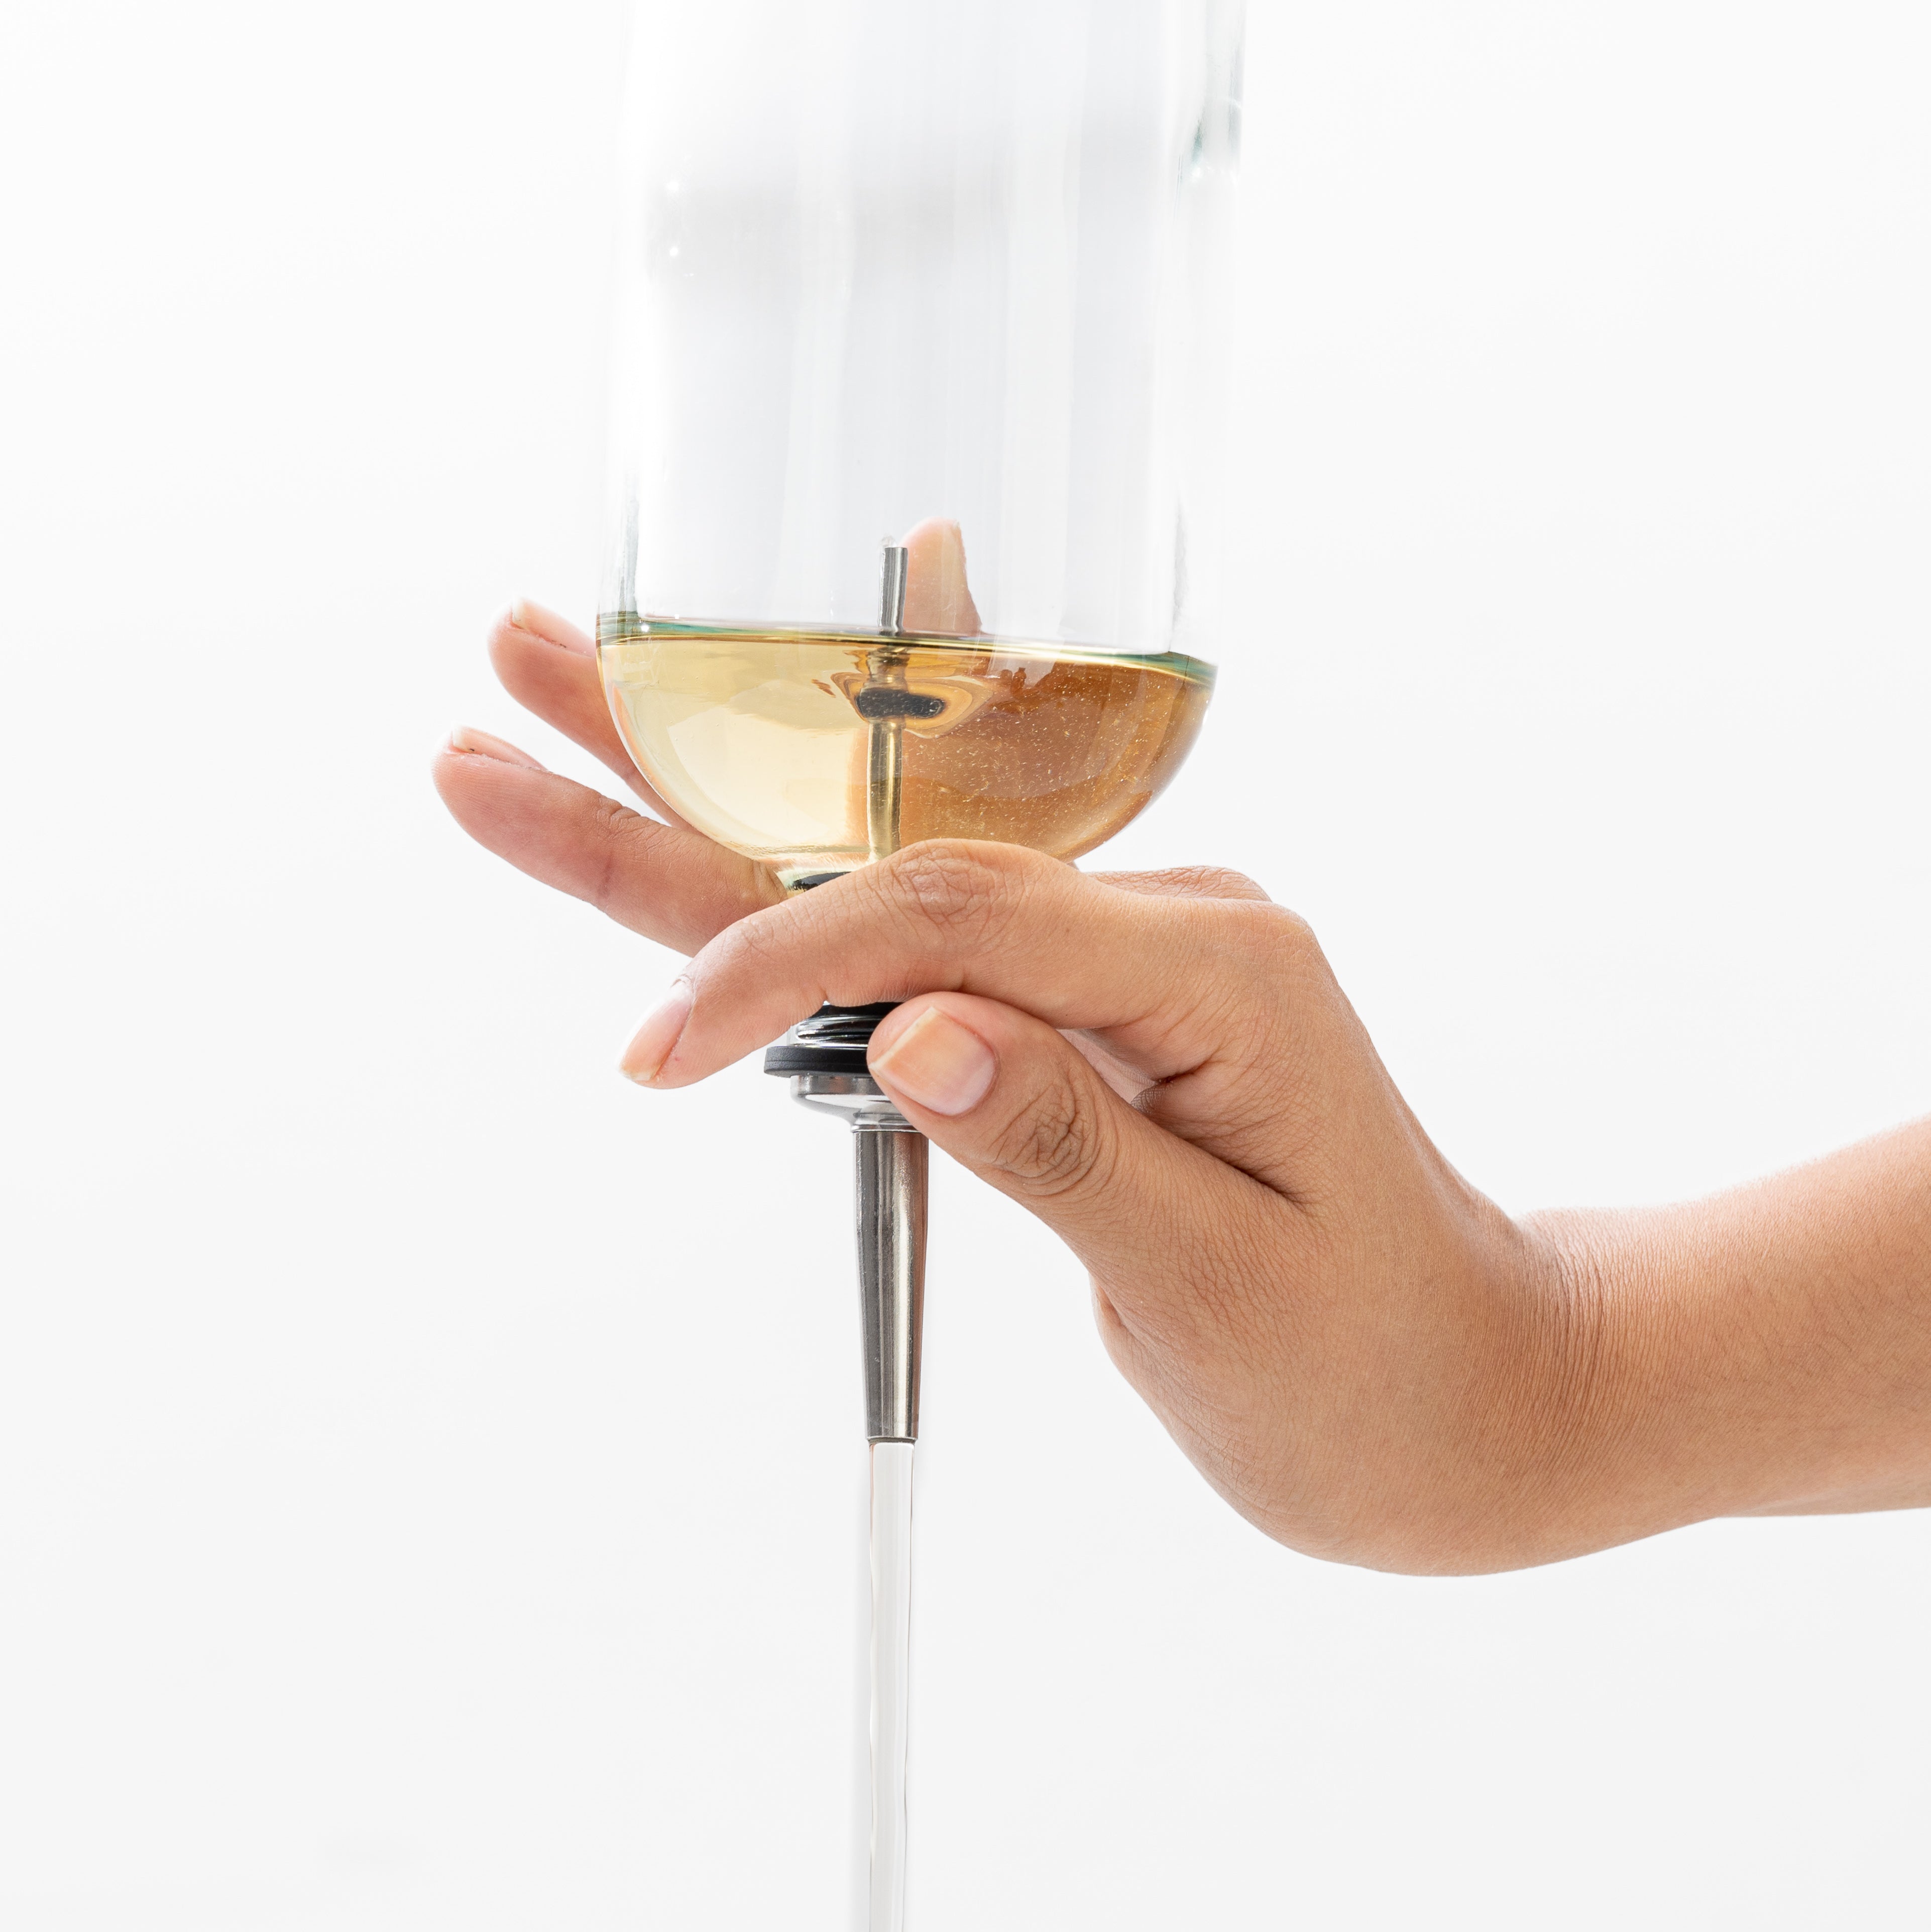 Hand holding a clear bottle with champagne-colored liquid upside down, with liquid coming out a stainless steel pour spout